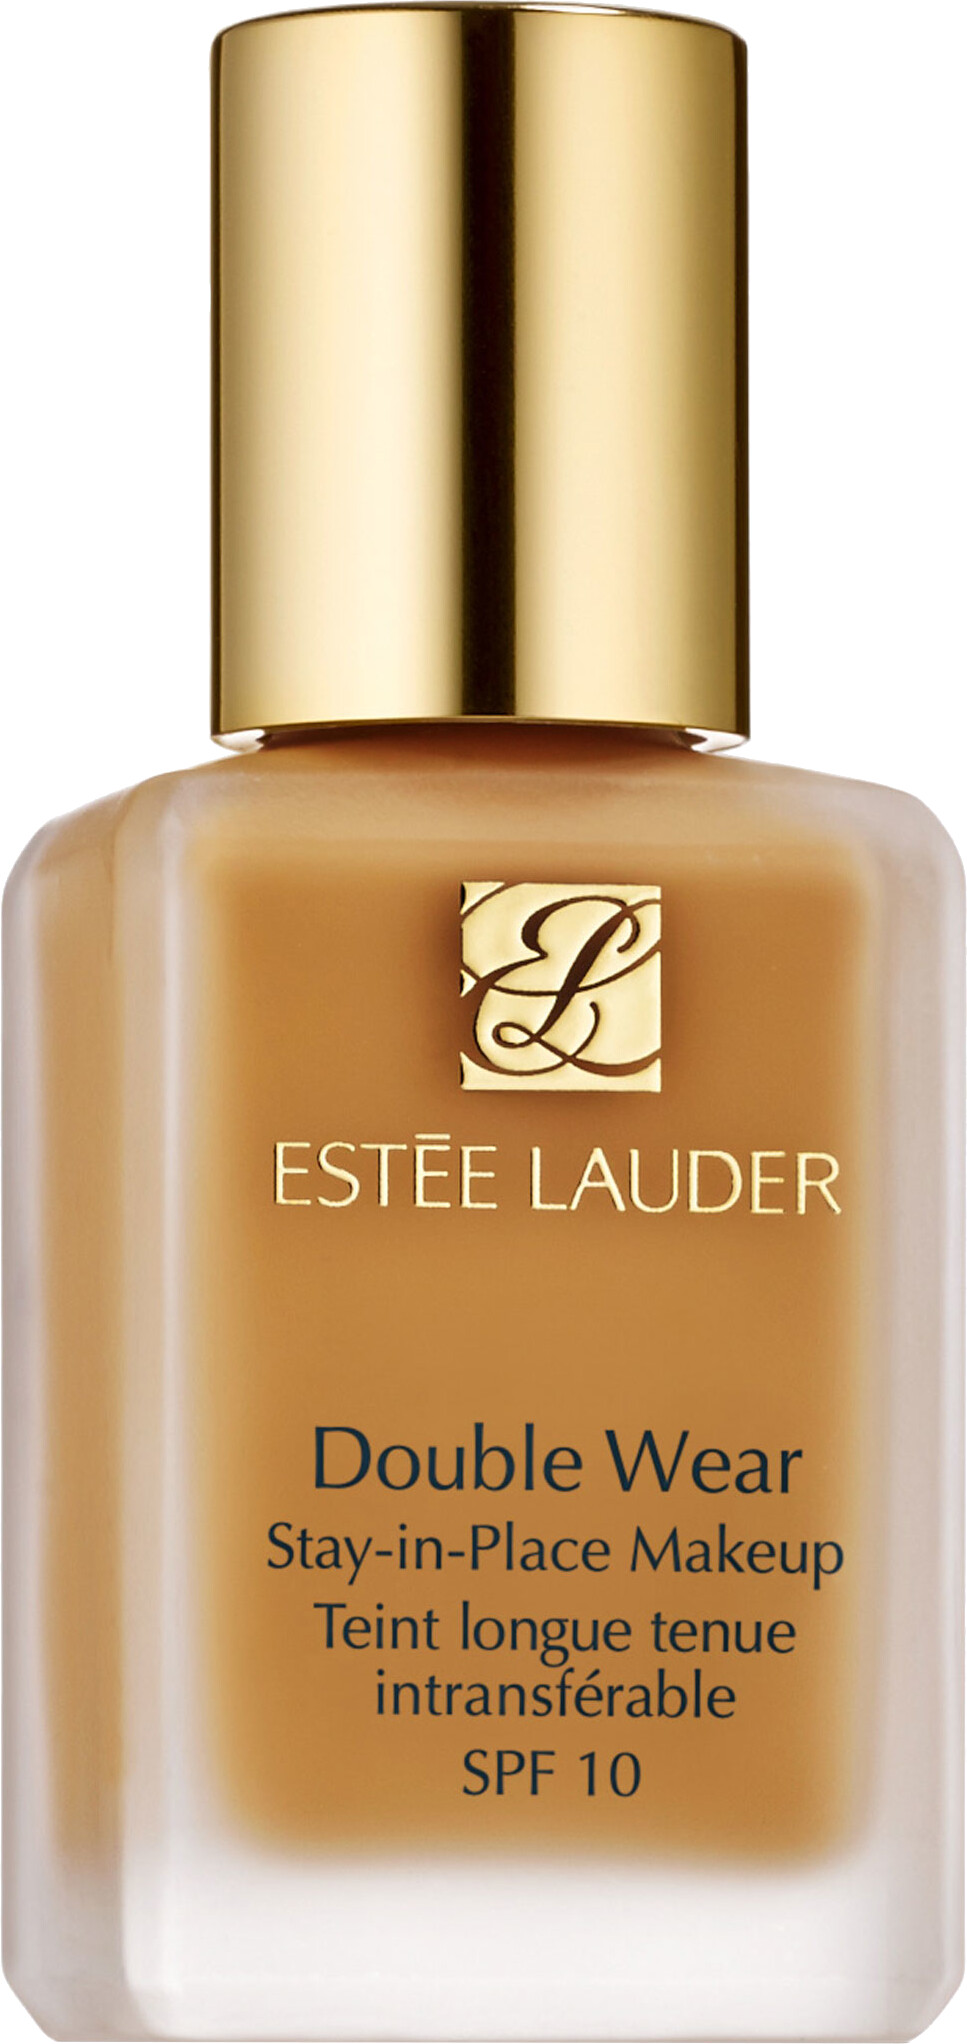 Estee Lauder Double Wear Stay-in-Place Foundation SPF10 30ml 3W0 - Warm Creme